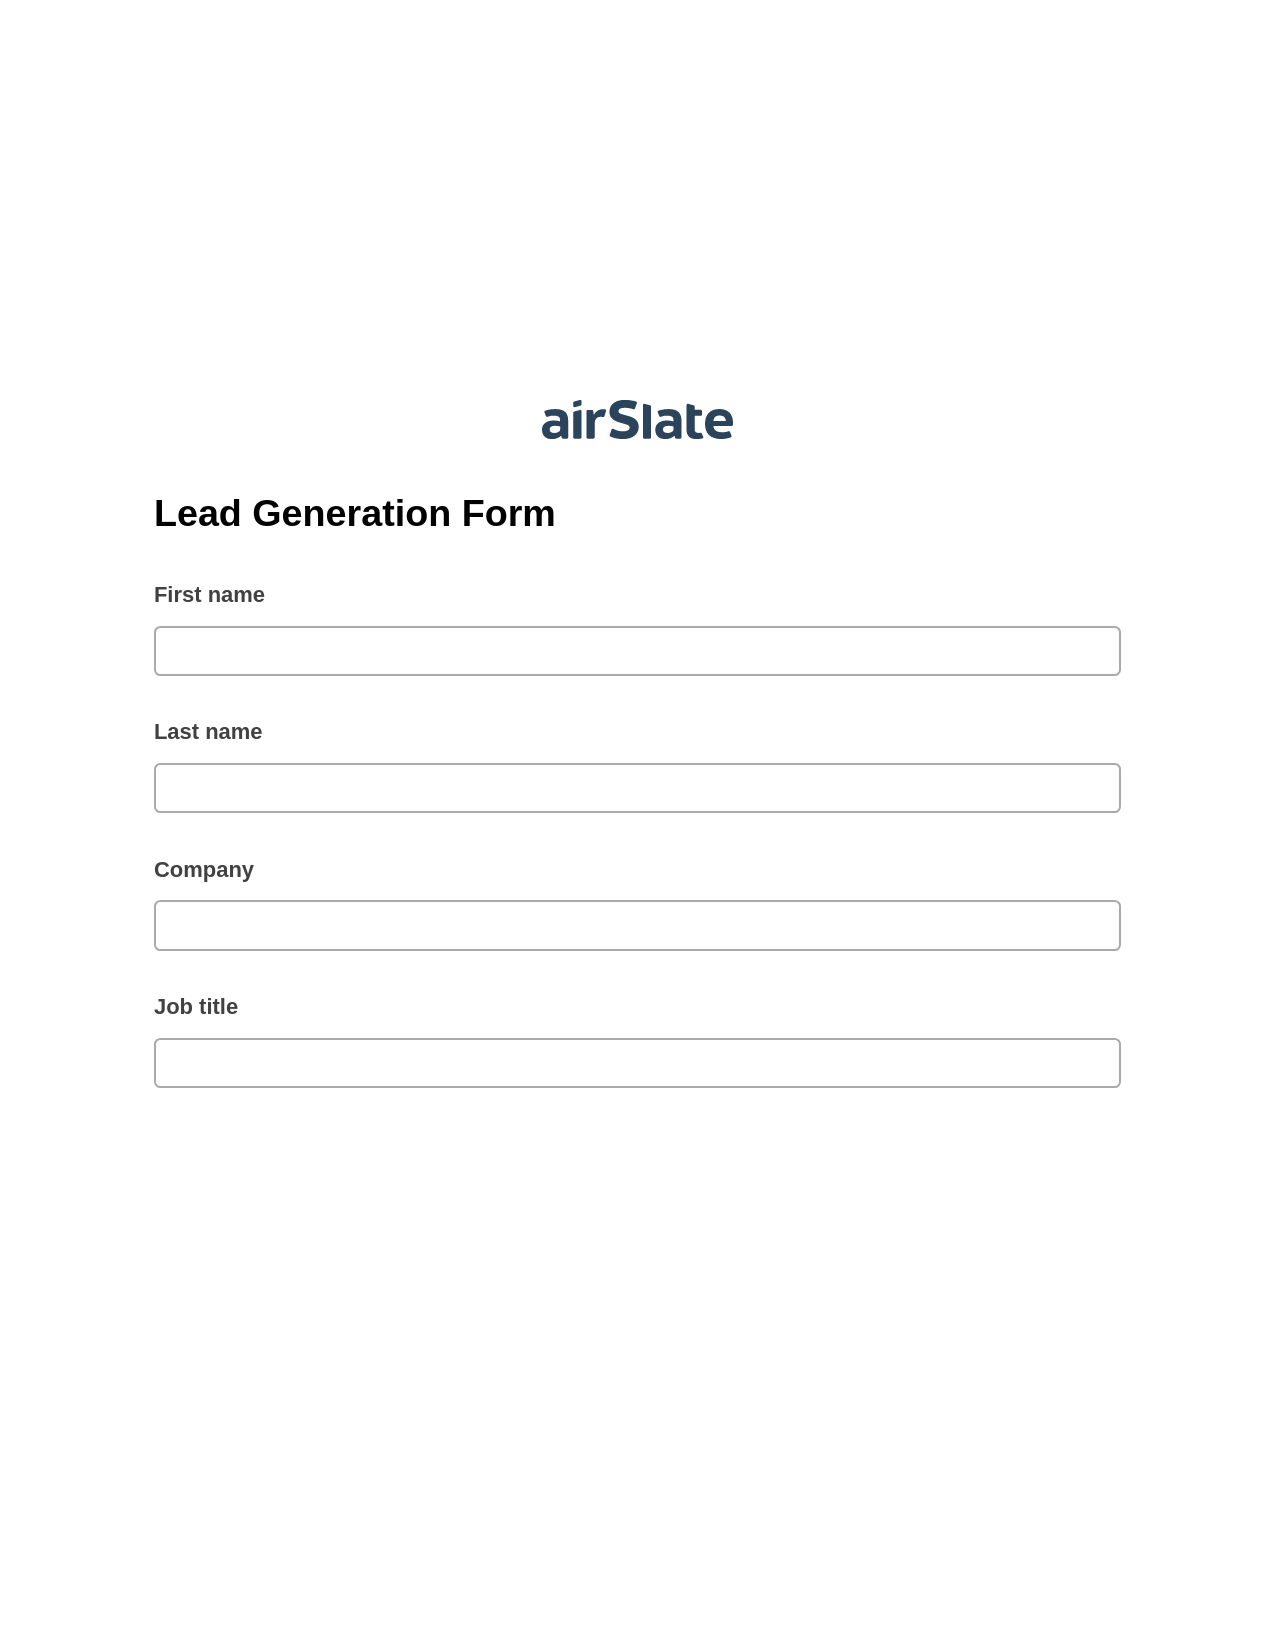 Lead Generation Form Pre-fill from Google Sheets Bot, Slack Notification Bot, Archive to Dropbox Bot